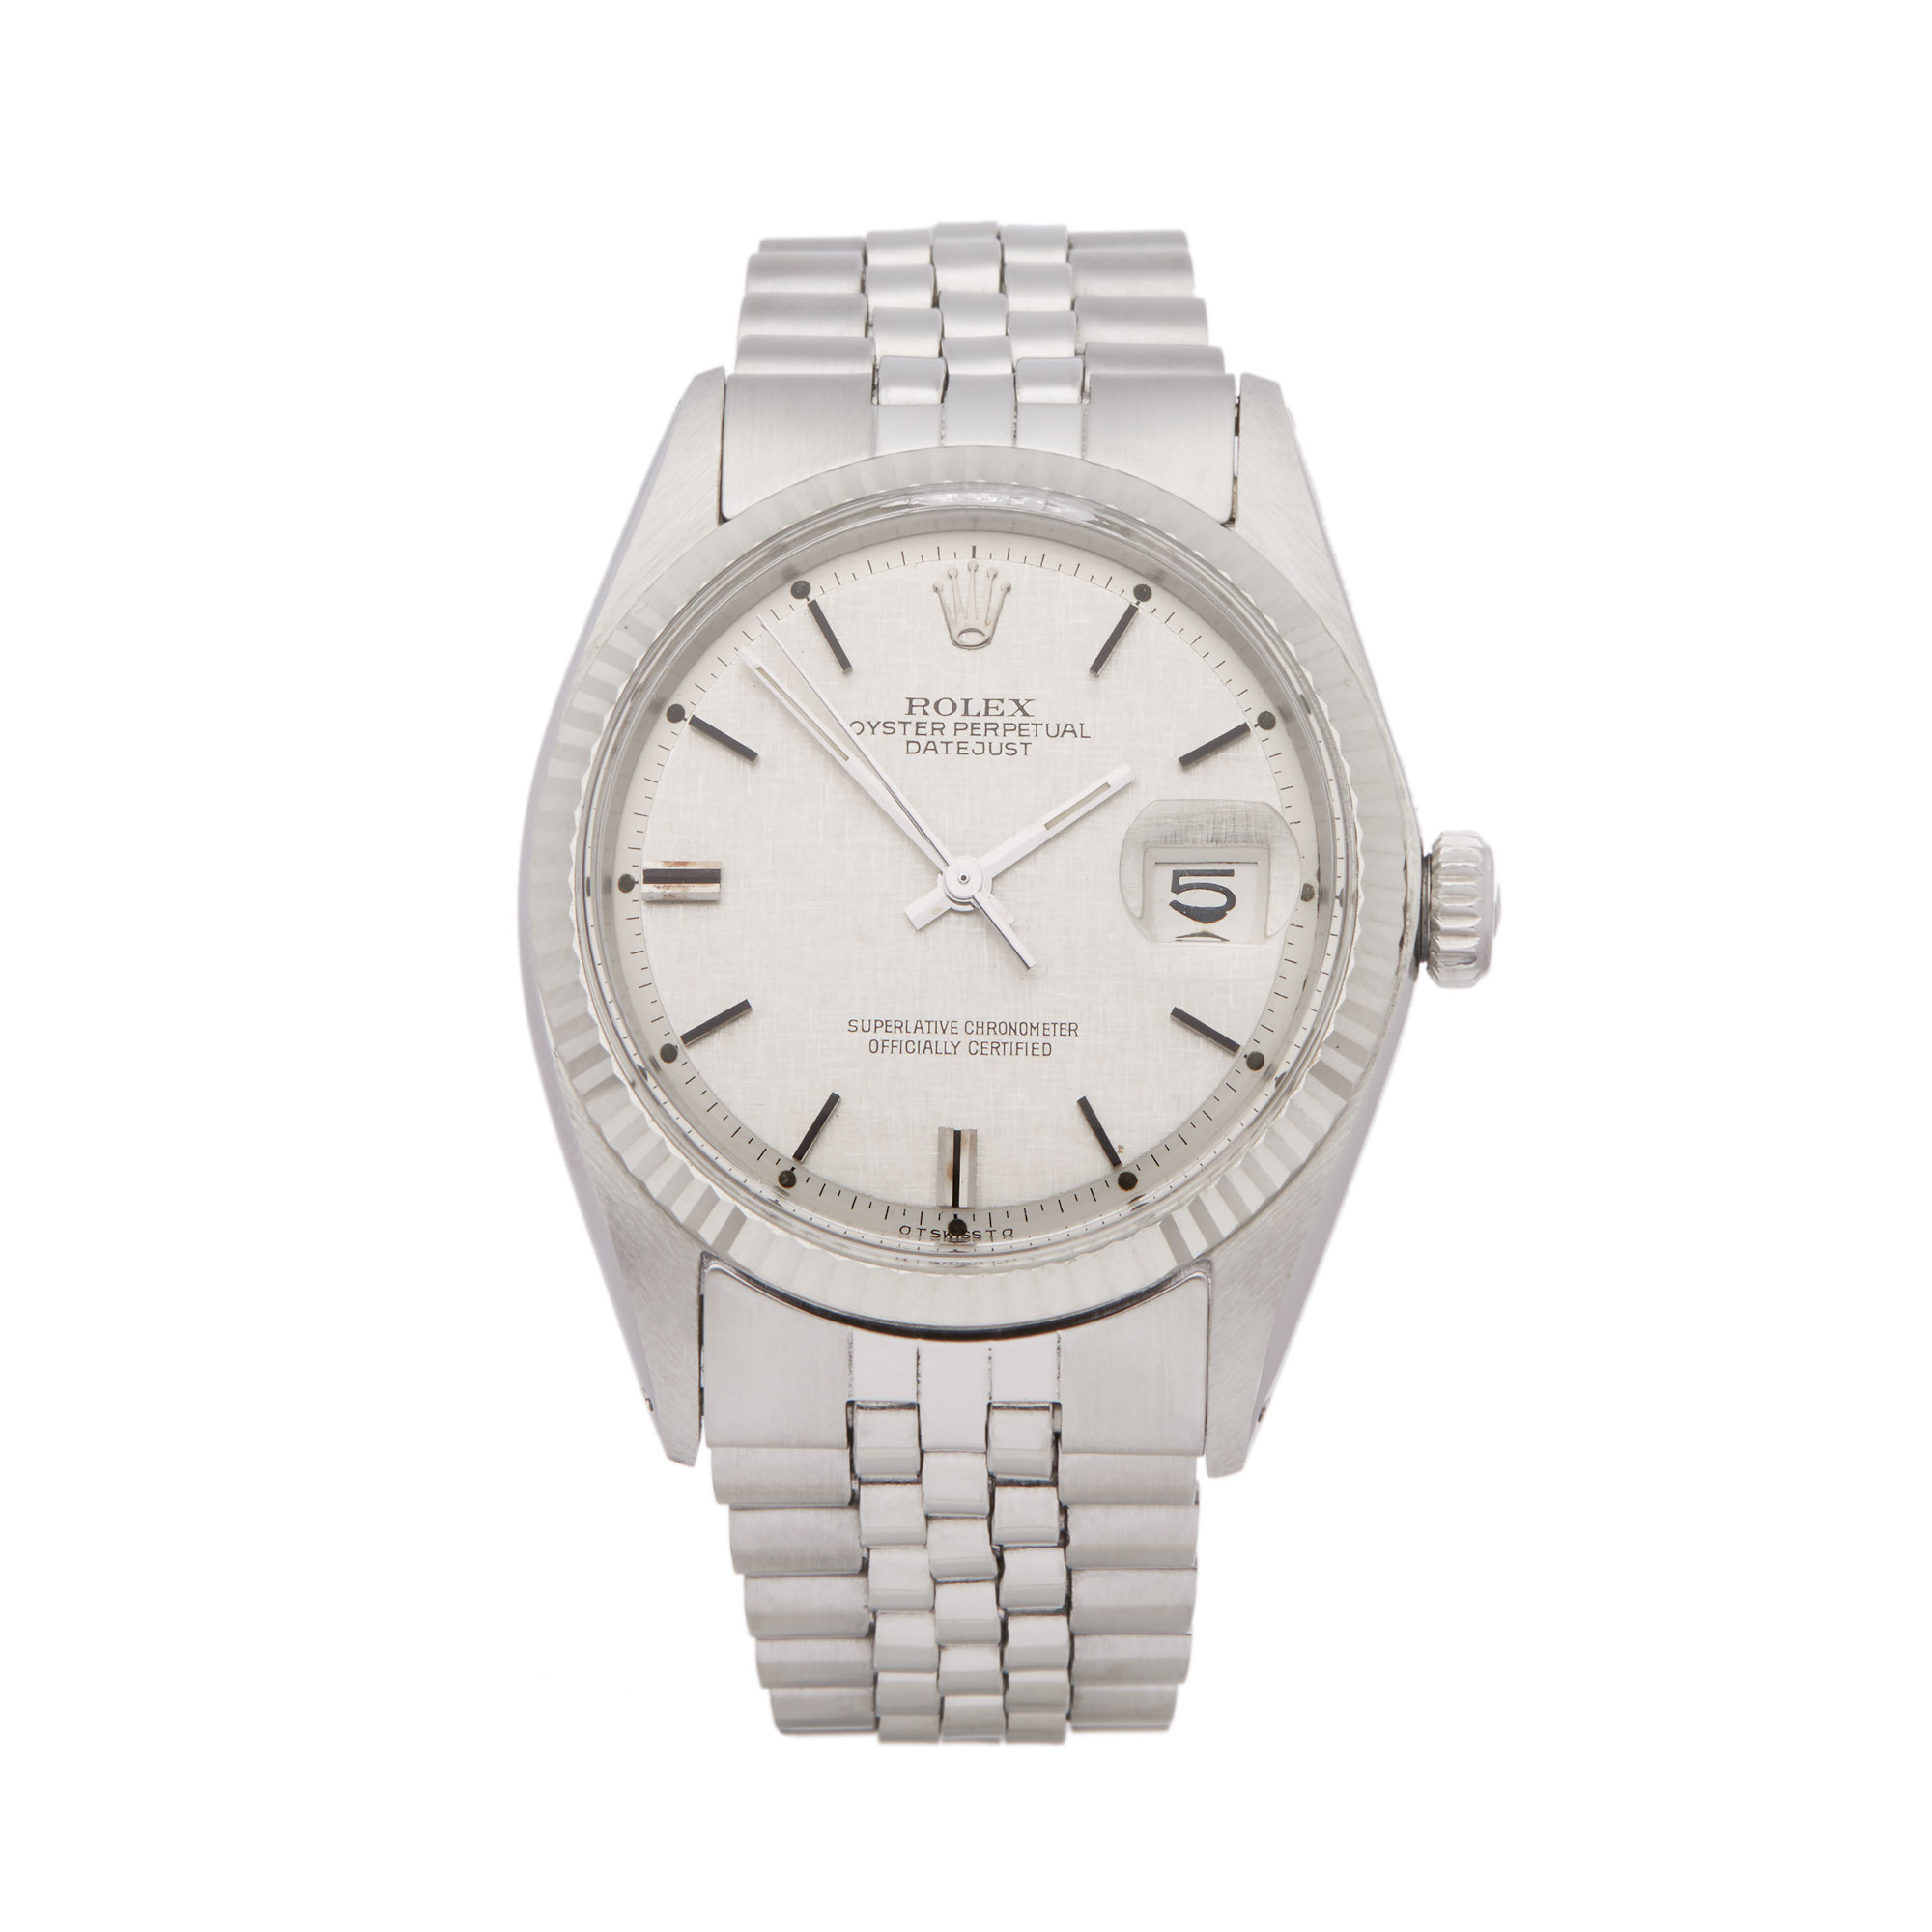 Rolex Datejust 36 1601 Men Stainless Steel Linen Dial Sigma "Aprior" Watch - Image 7 of 8